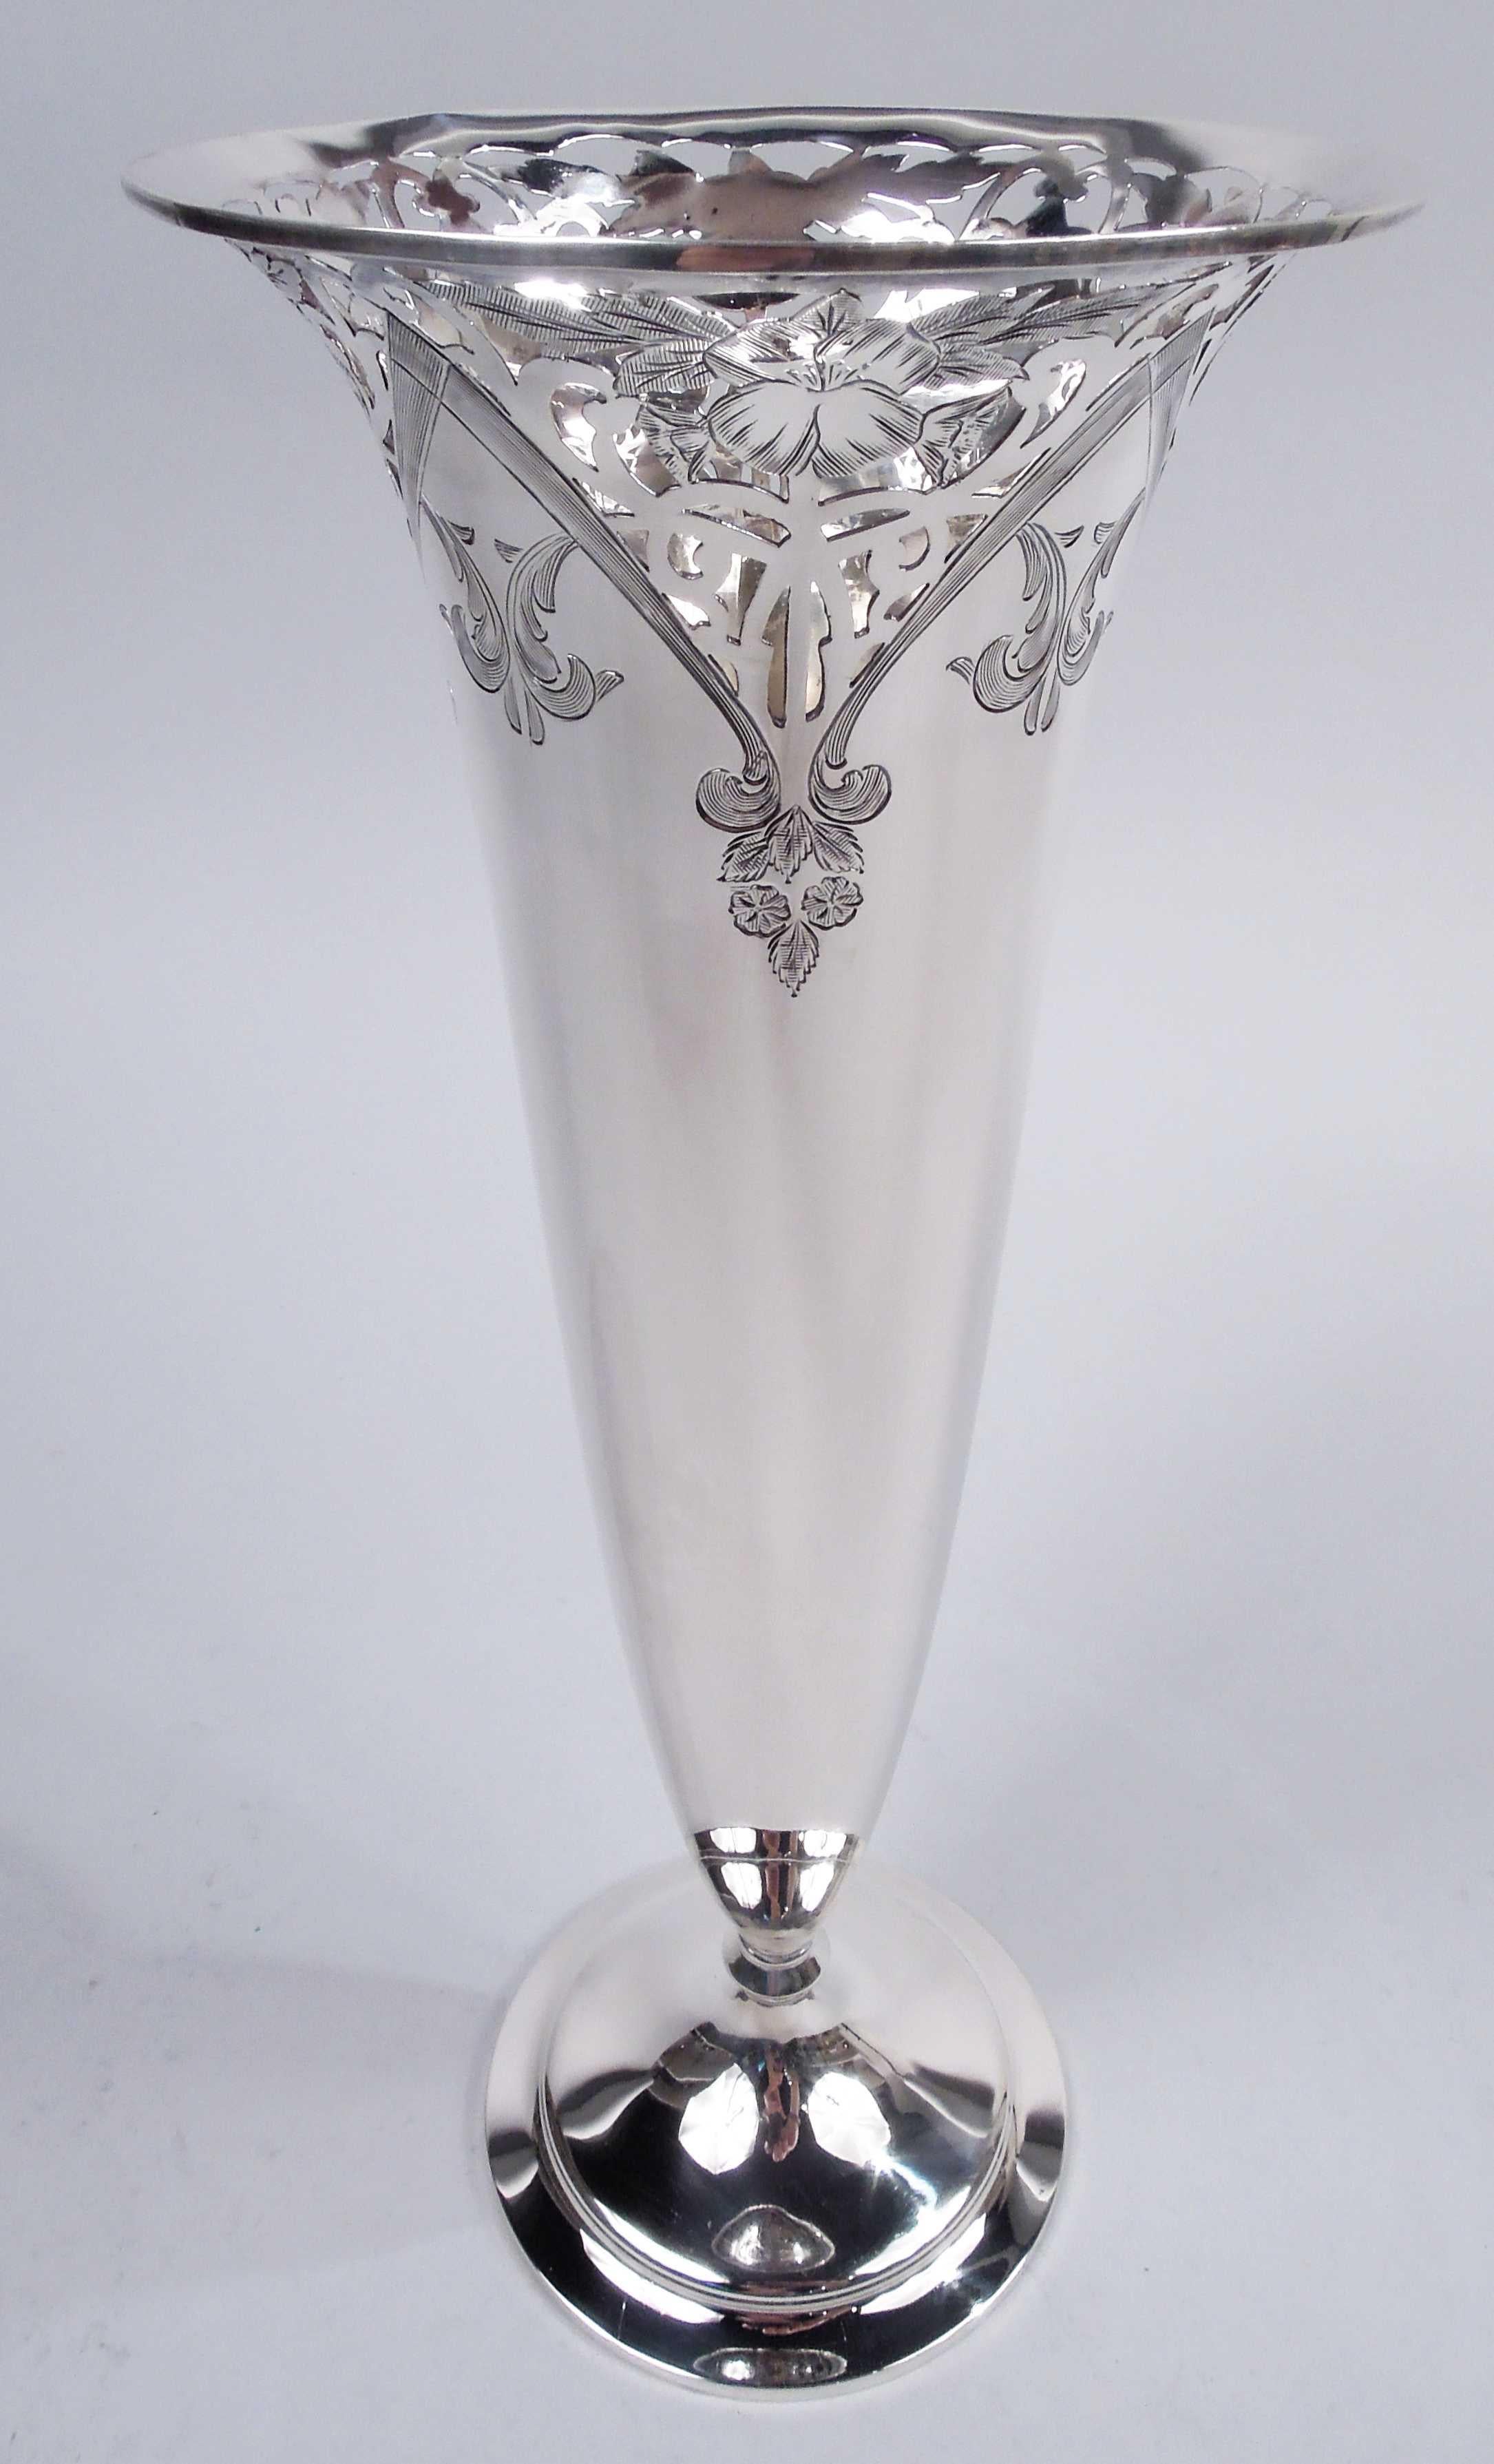 Edwardian Art Nouveau sterling silver vase. Made by Frank W. Smith in Gardner, Mass., ca 1910. Tapering sides with flared mouth, convex base knop, and raised and stepped foot. At top pierced scrollwork and engraved flowers and leaves framed by